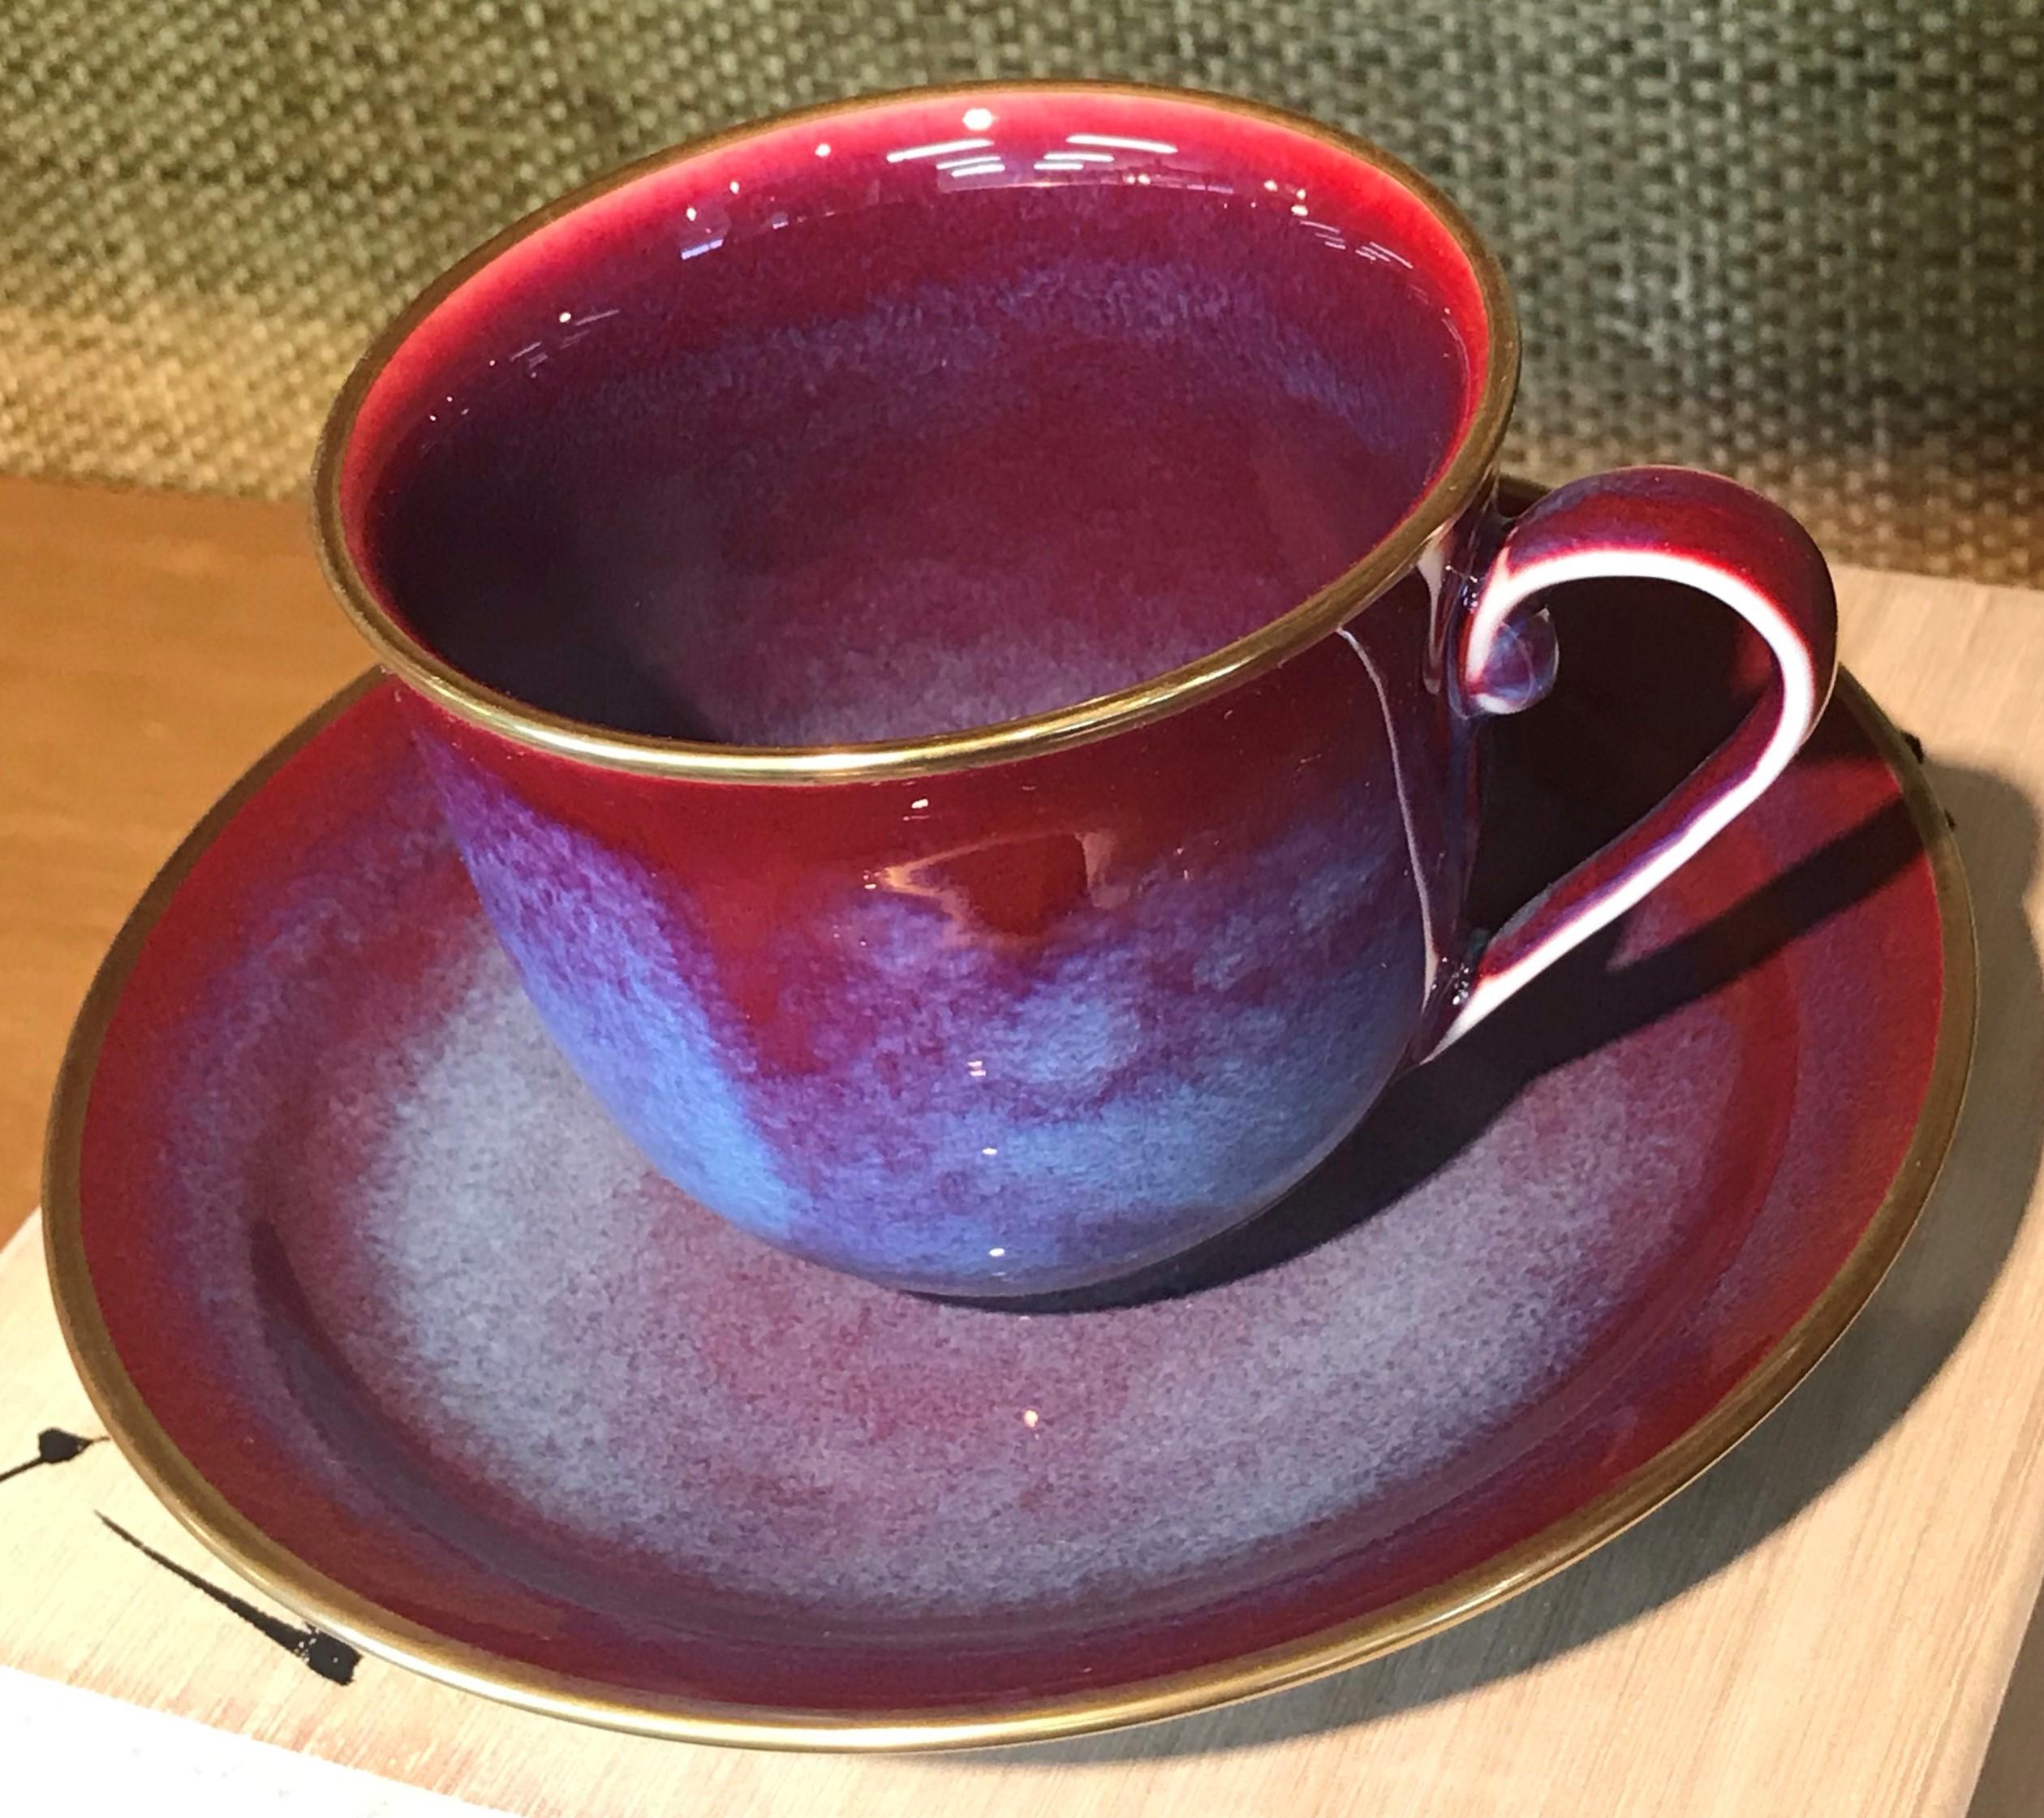 Unique Japanese contemporary gilded collector porcelain cup and saucer, hand-glazed in stunning signature wine red on a beautifully shaped body, a signed work from one of the most striking collections by highly acclaimed award-winning master